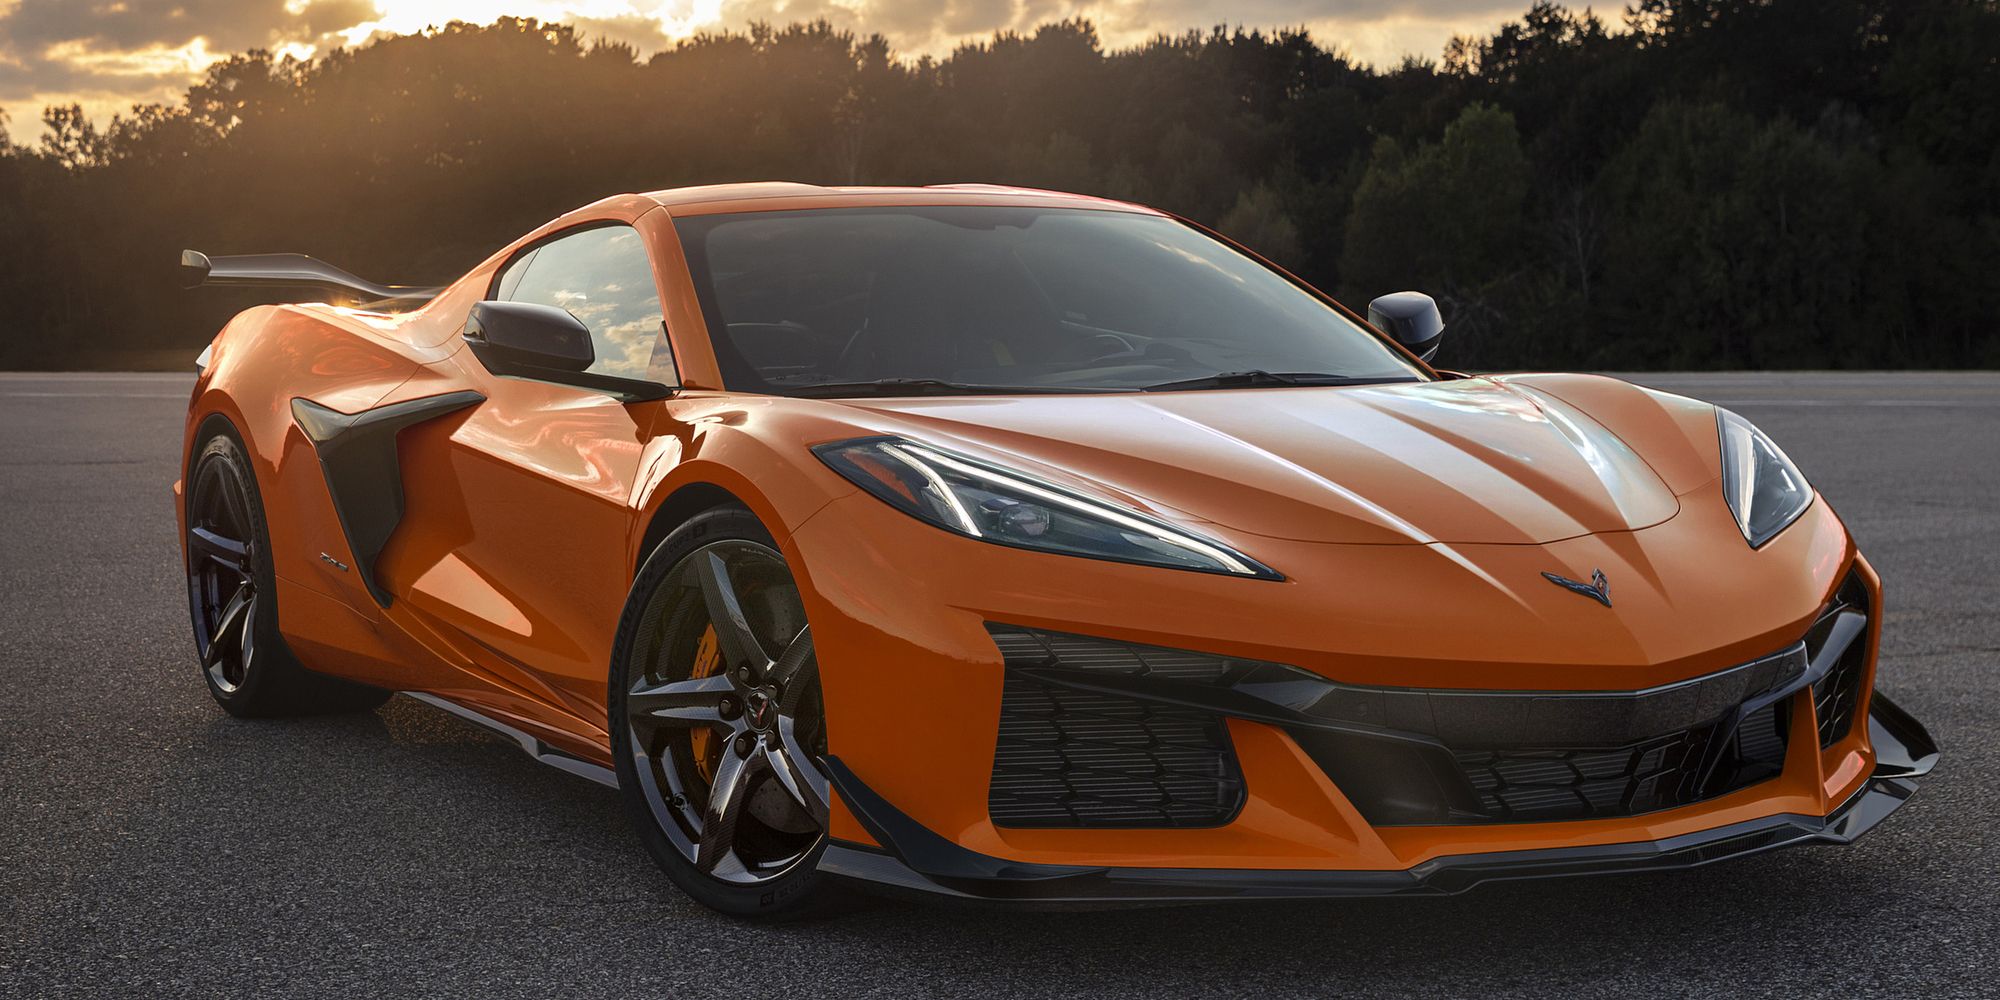 The front of the new Corvette Z06